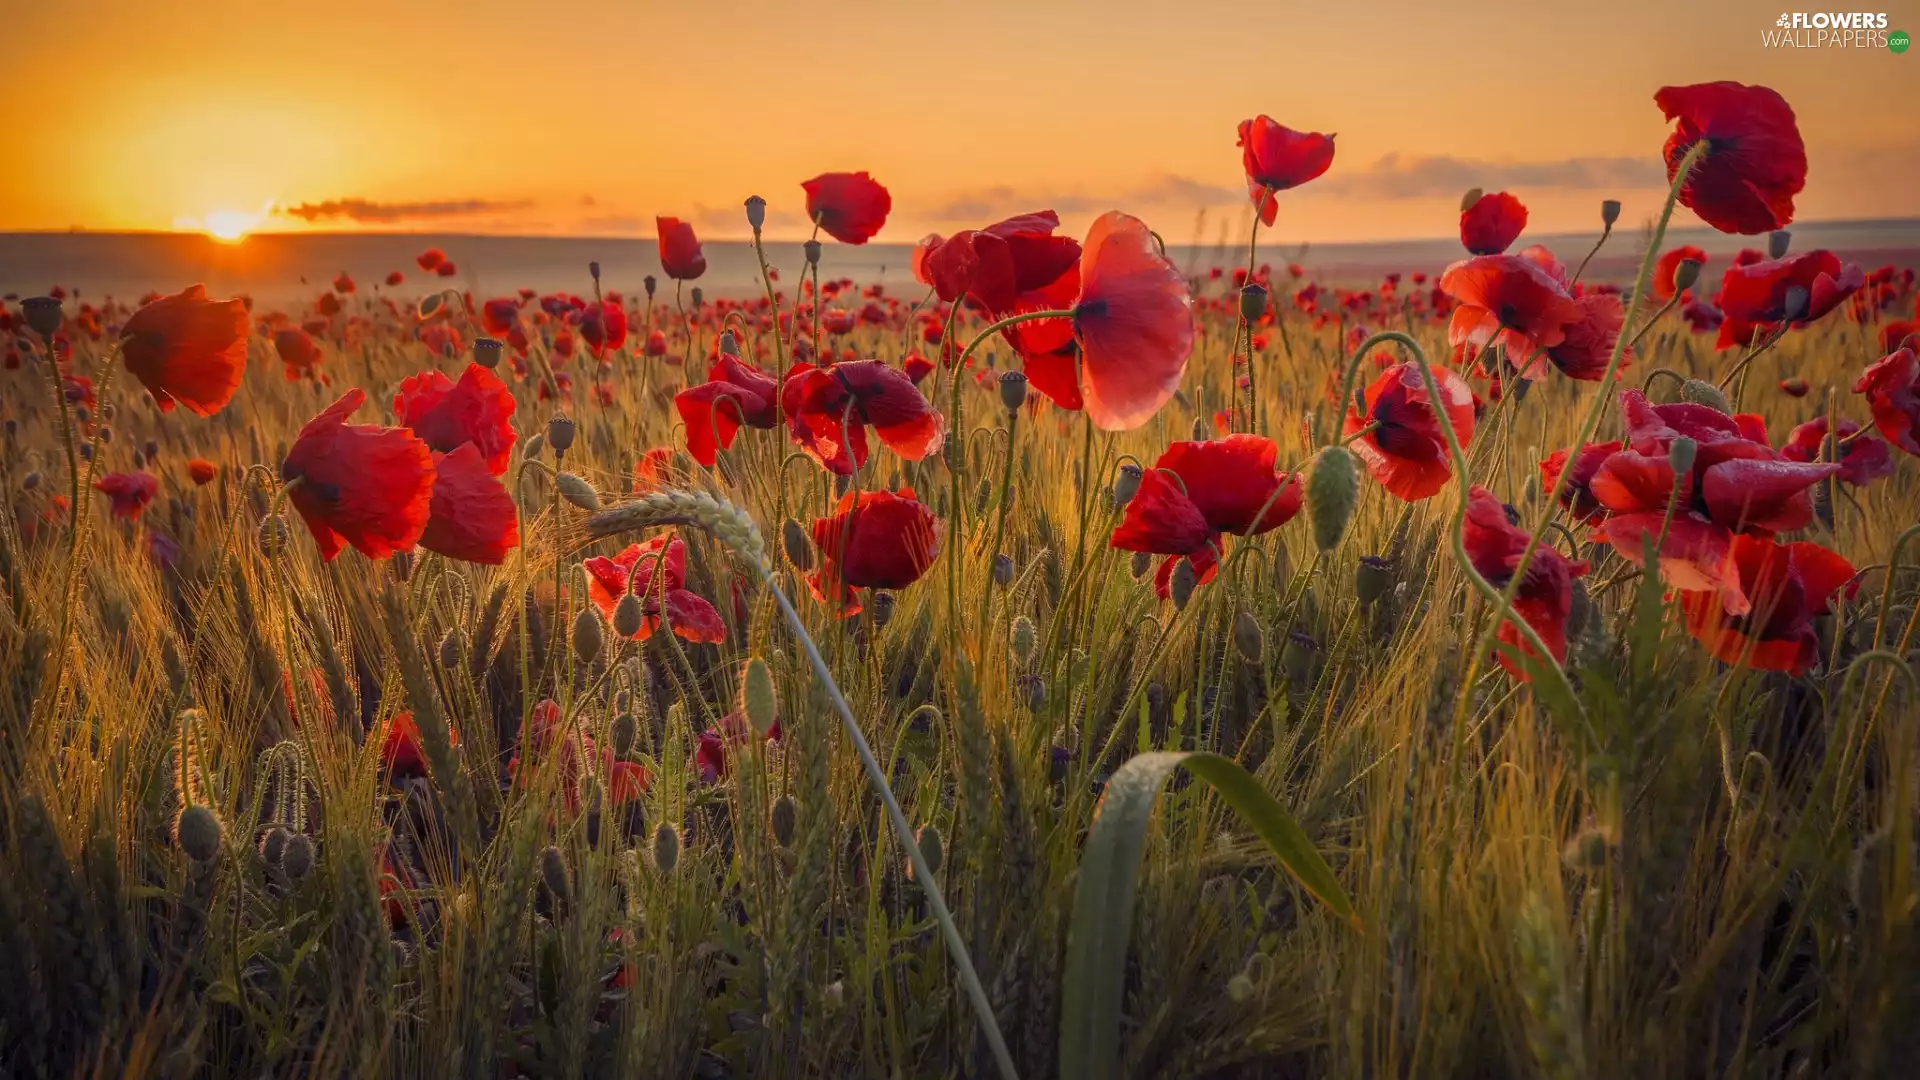 cereals, Field, Red, Ears, Great Sunsets, Flowers, papavers